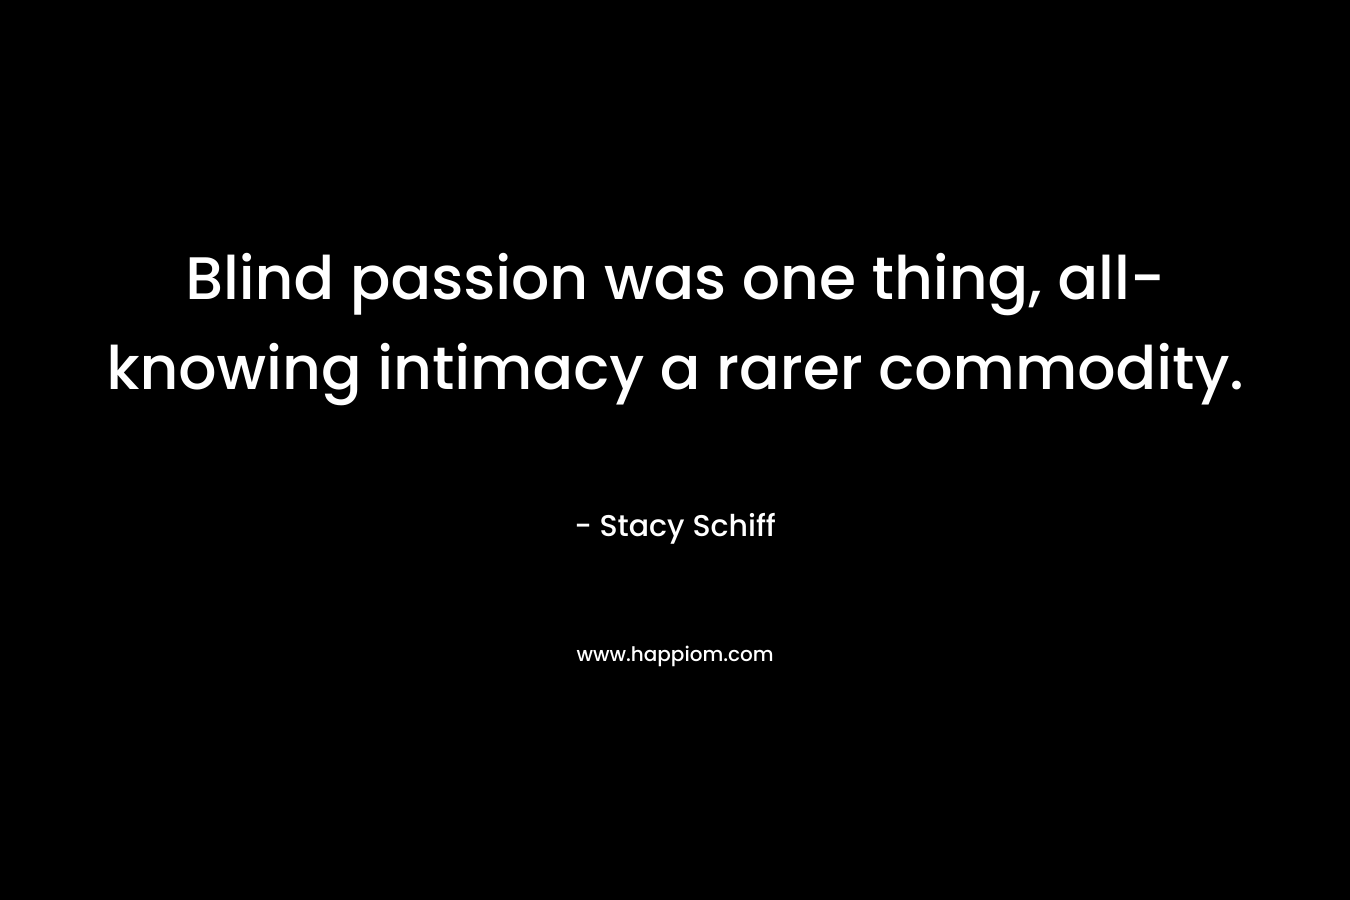 Blind passion was one thing, all-knowing intimacy a rarer commodity. – Stacy Schiff